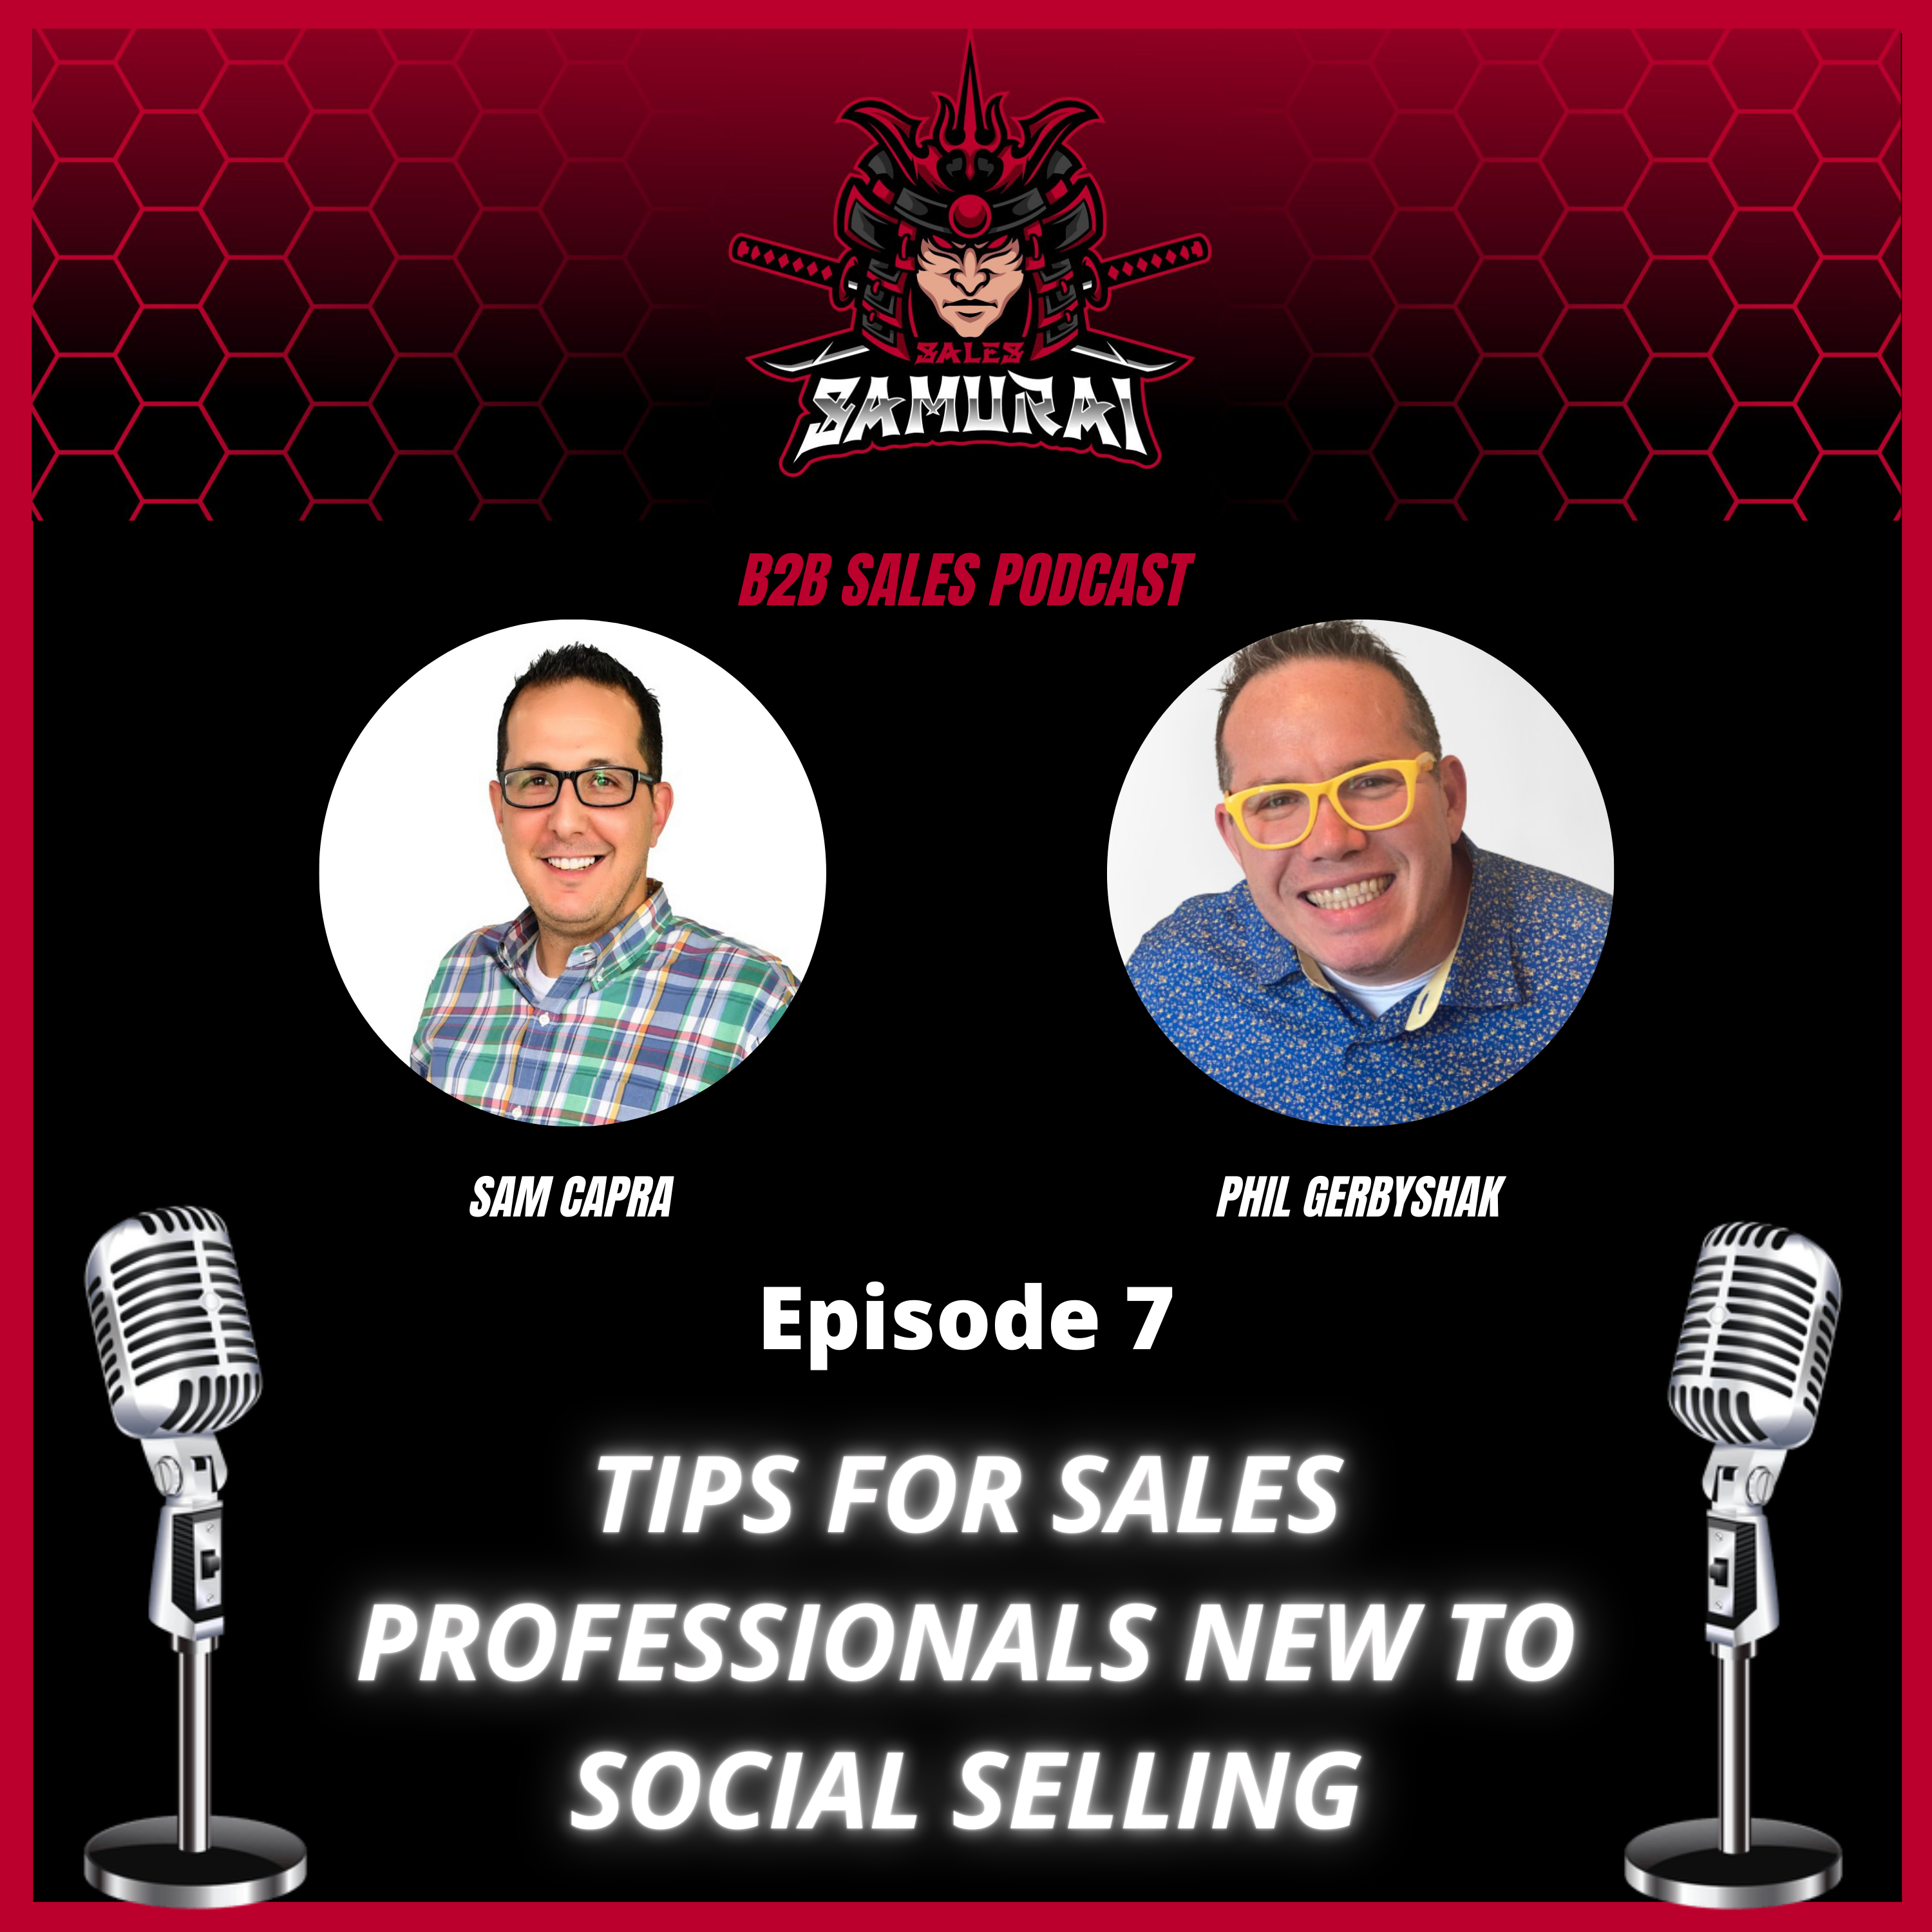 Tips for Sales Professionals New to Social Selling